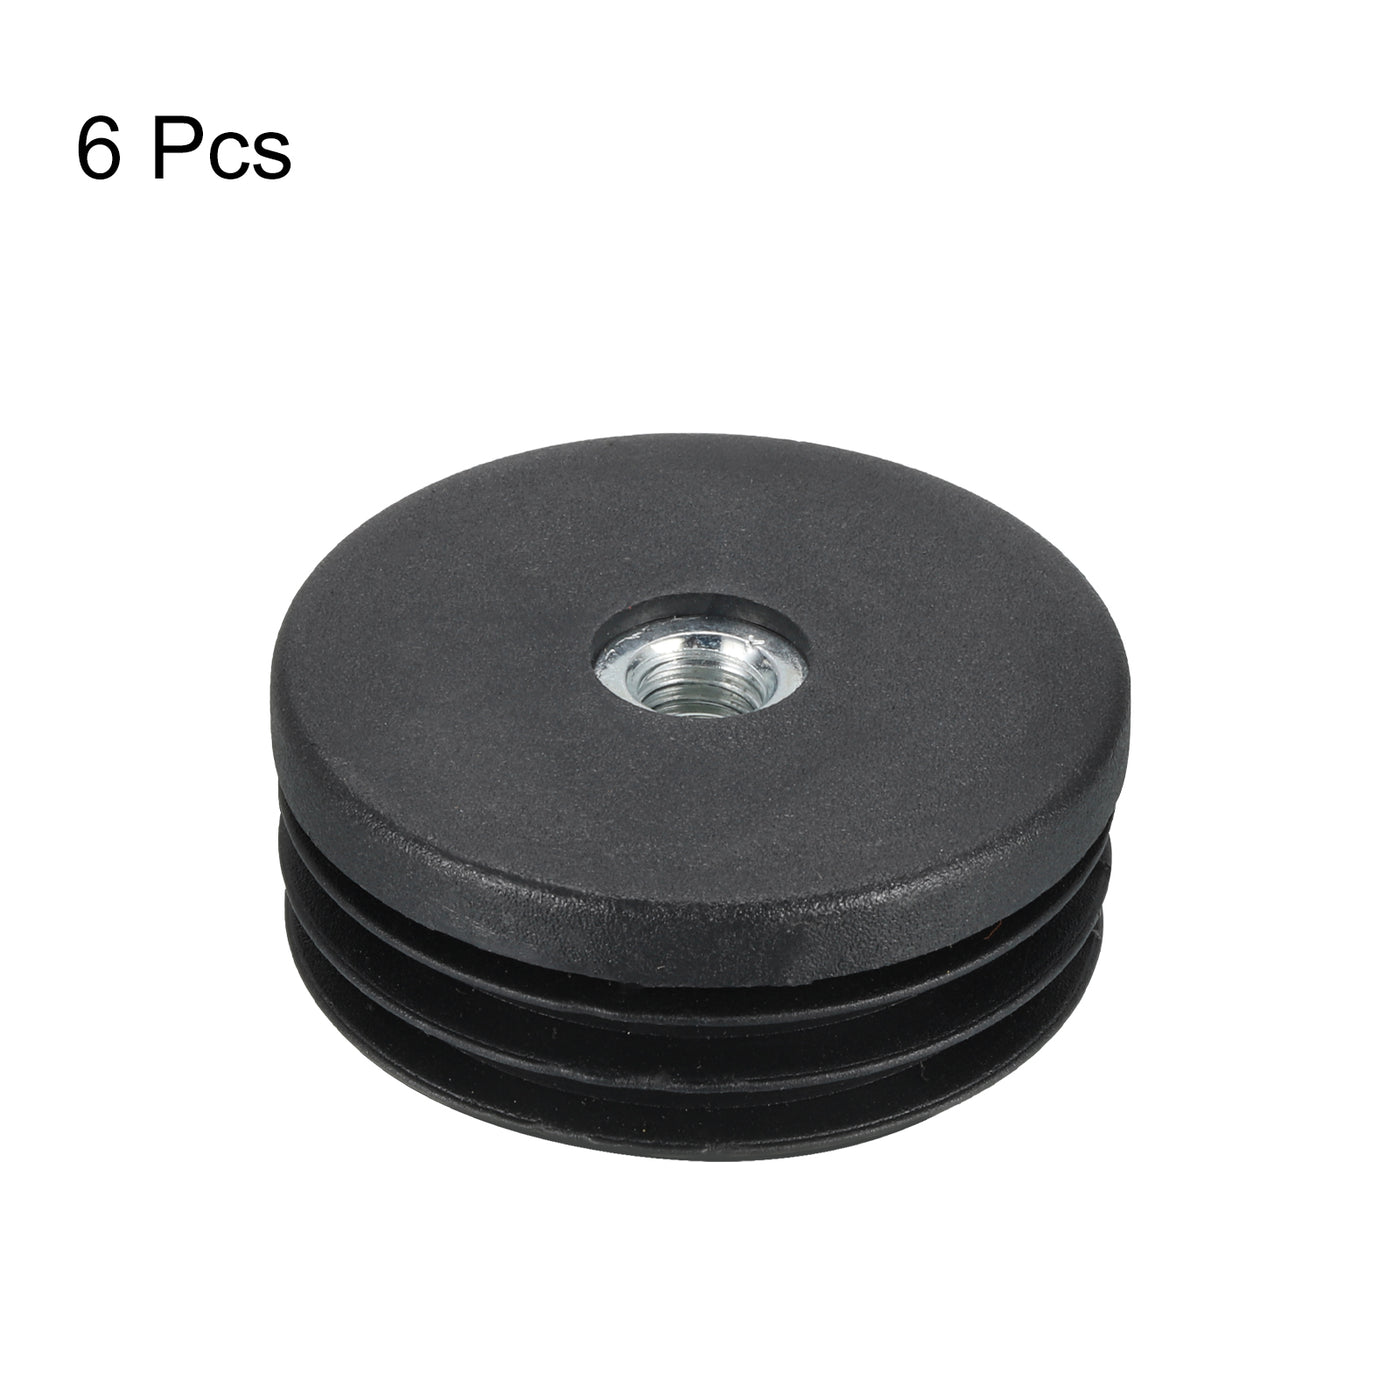 uxcell Uxcell 6Pcs Caster Insert with Thread, 50mm/1.97" M8 Thread for Furniture